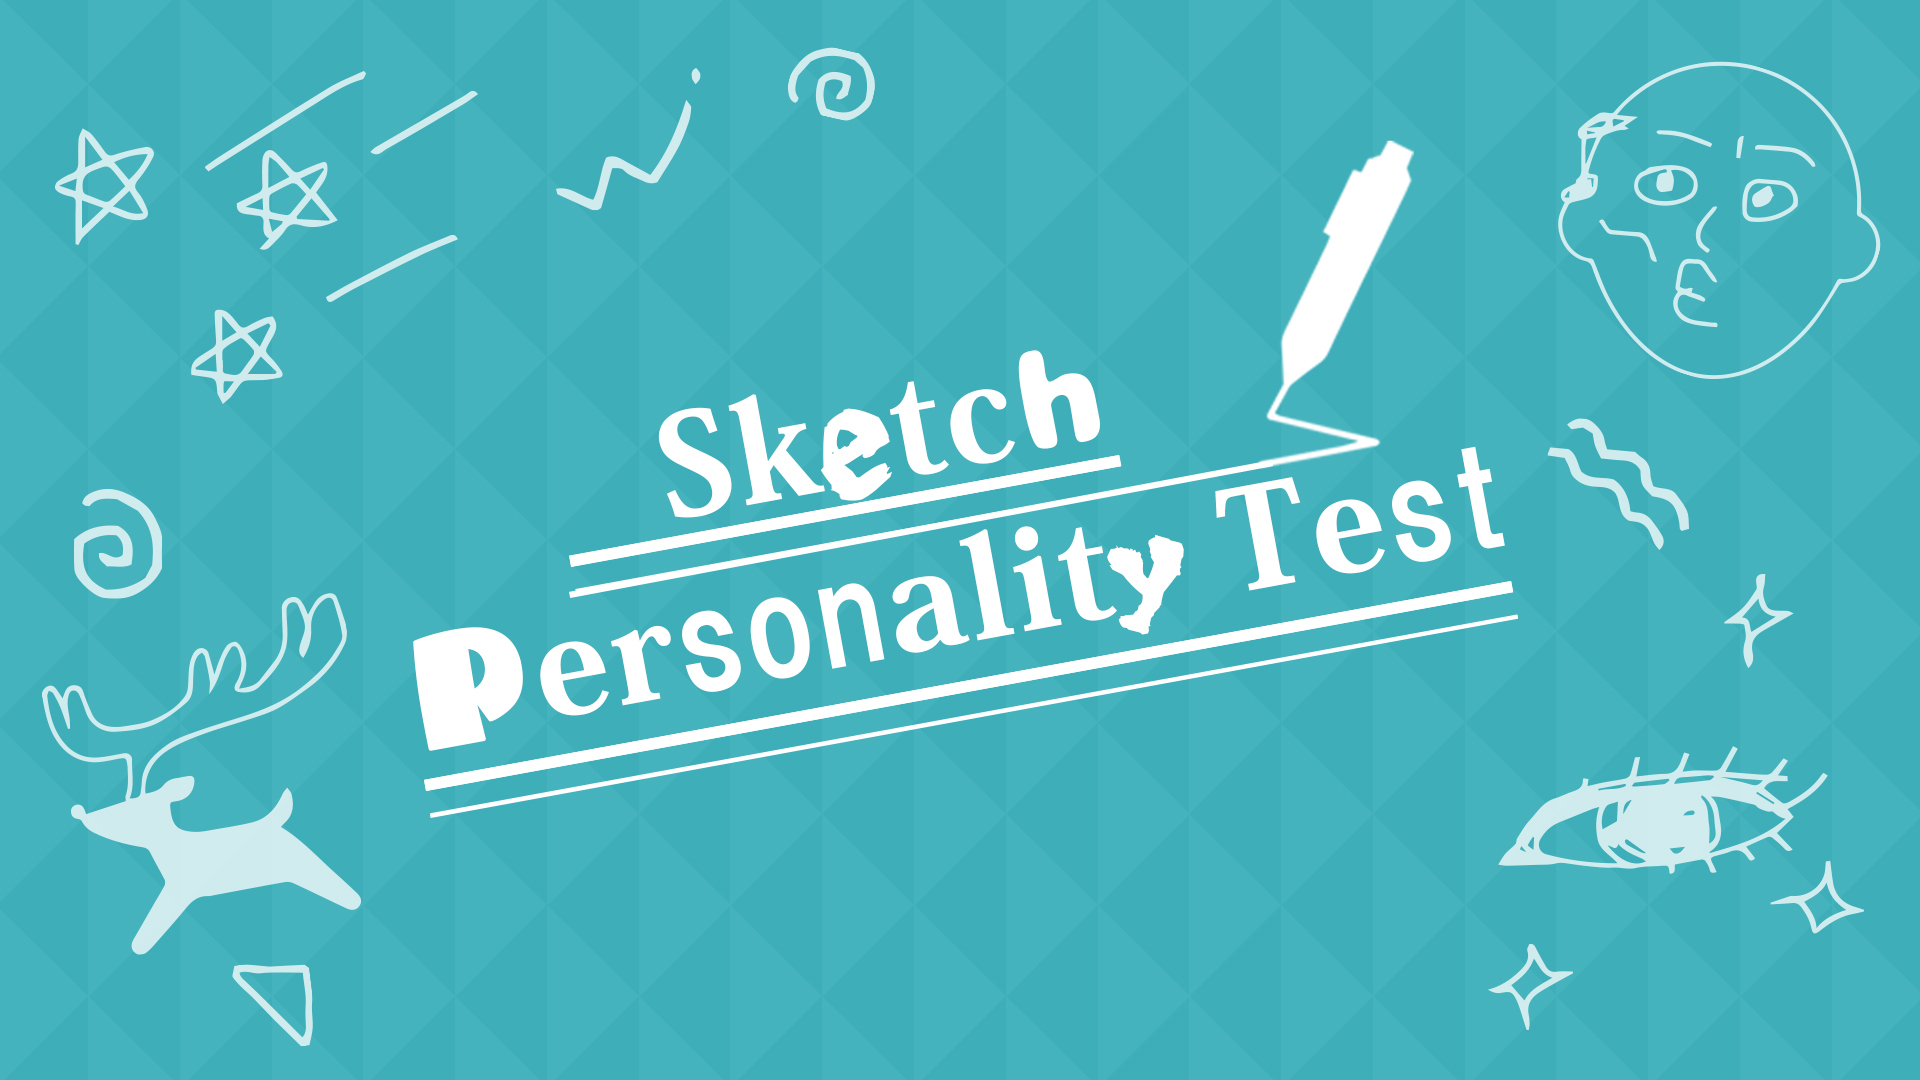 Sketch Personality Test